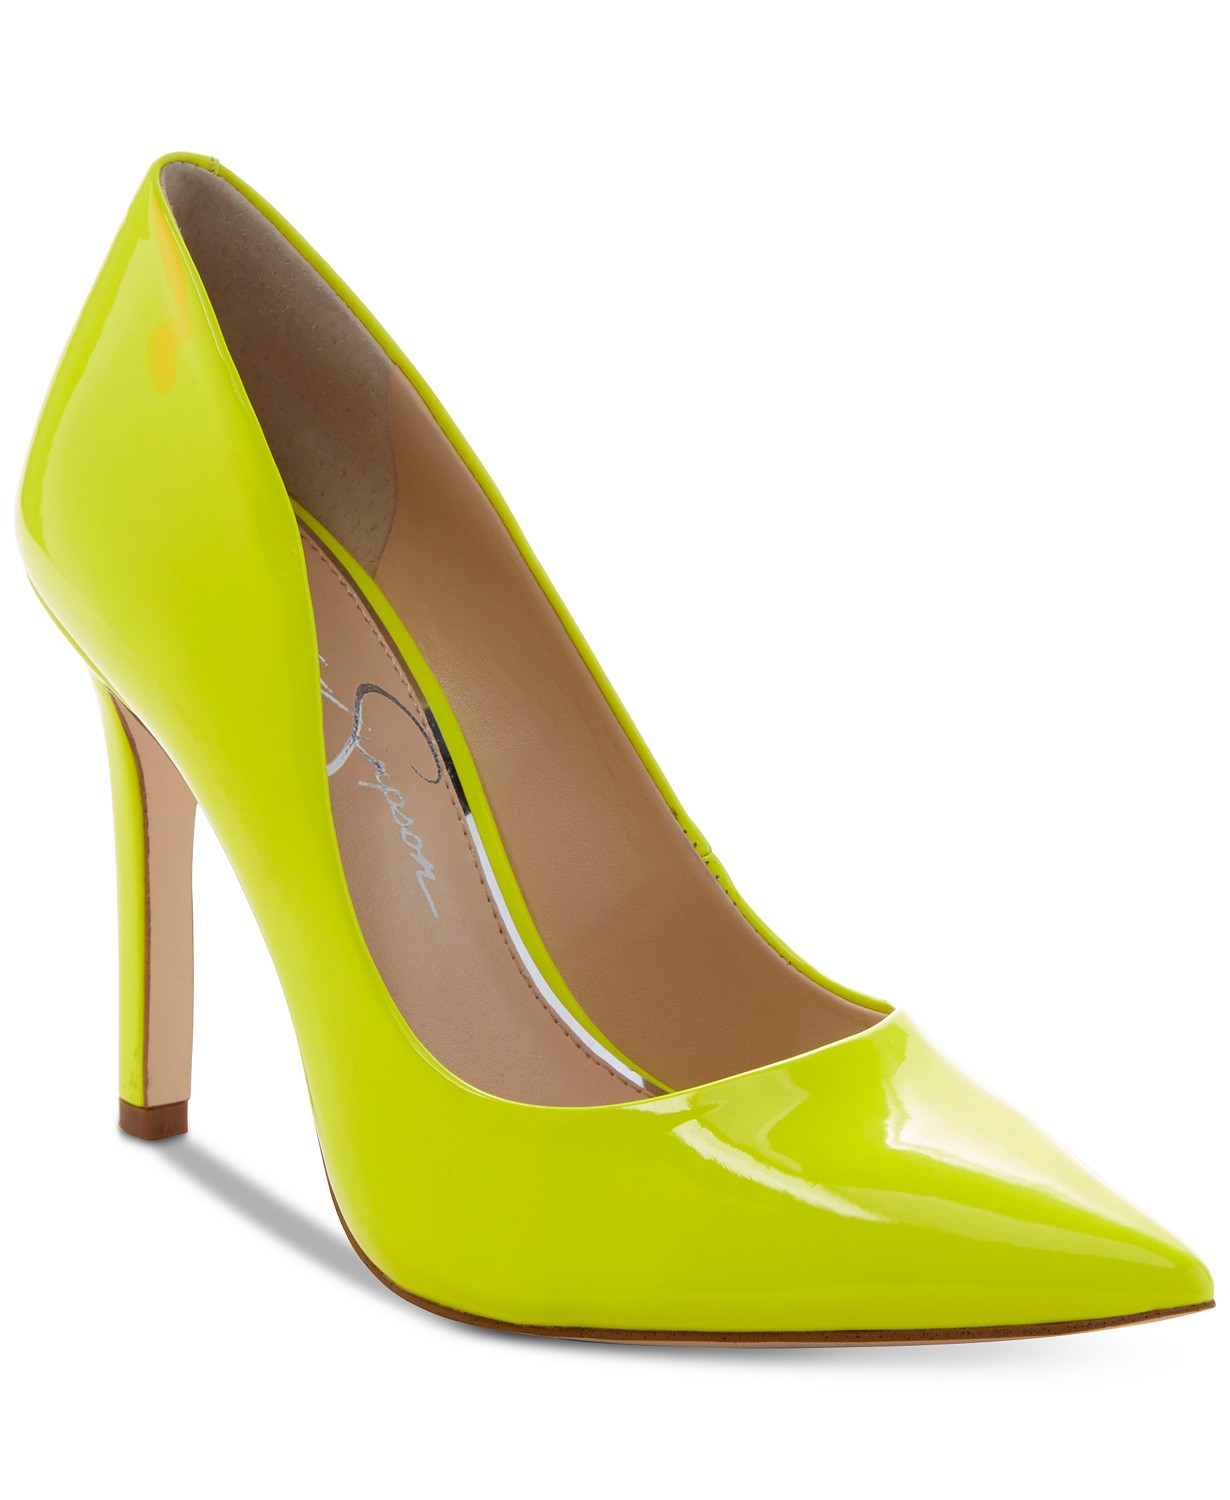 jessica simpson pointed toe shoes